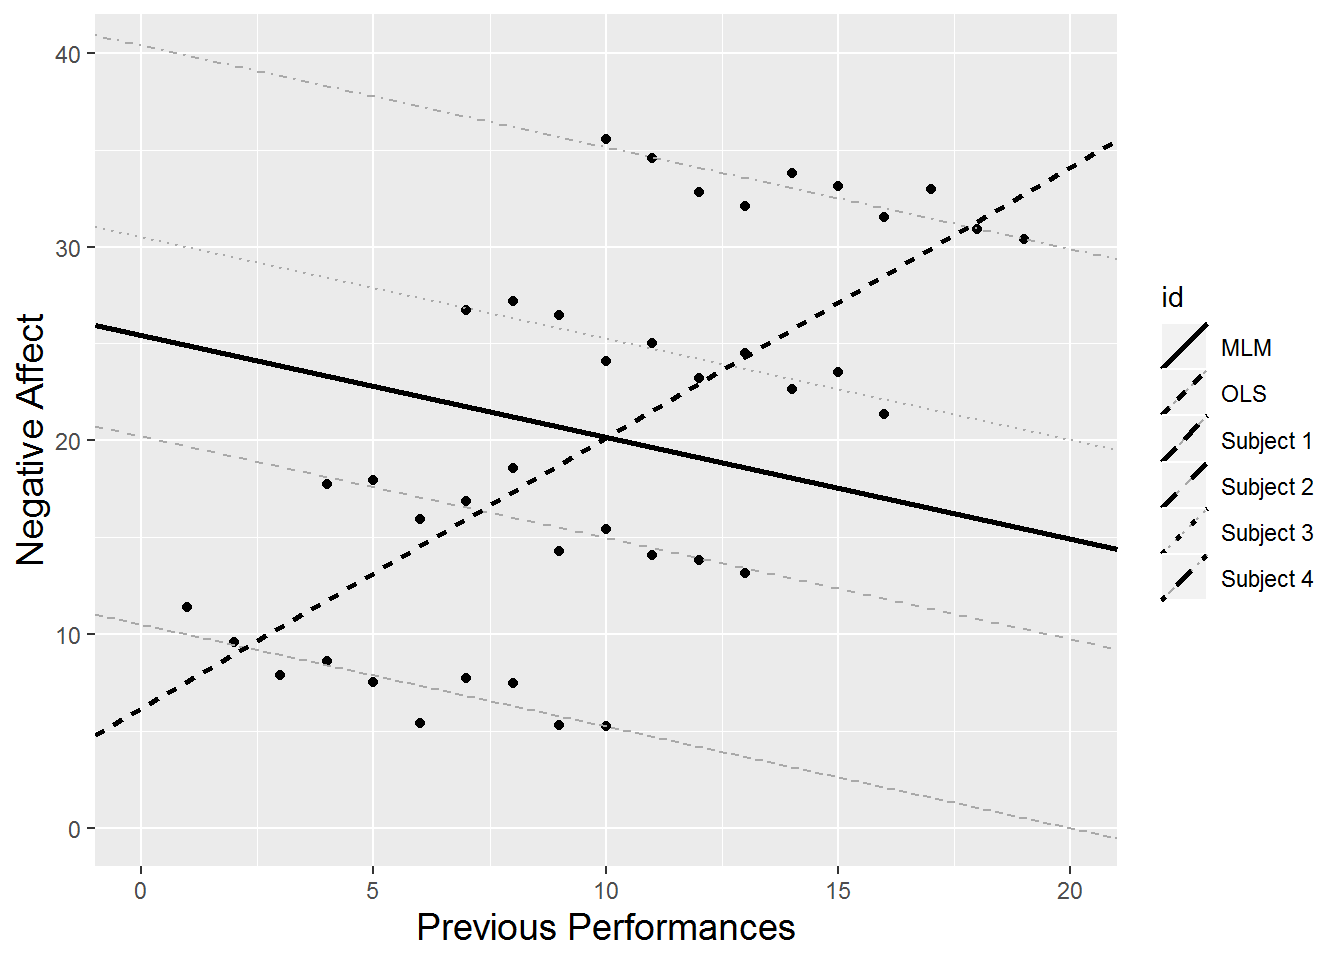 Hypothetical data from 4 subjects relating number of previous performances to negative affect.  The solid black line depicts the overall relationship between previous performances and negative affect as determined by a multilevel model, while the dashed black line depicts the overall relationship as determined by an OLS regression model.